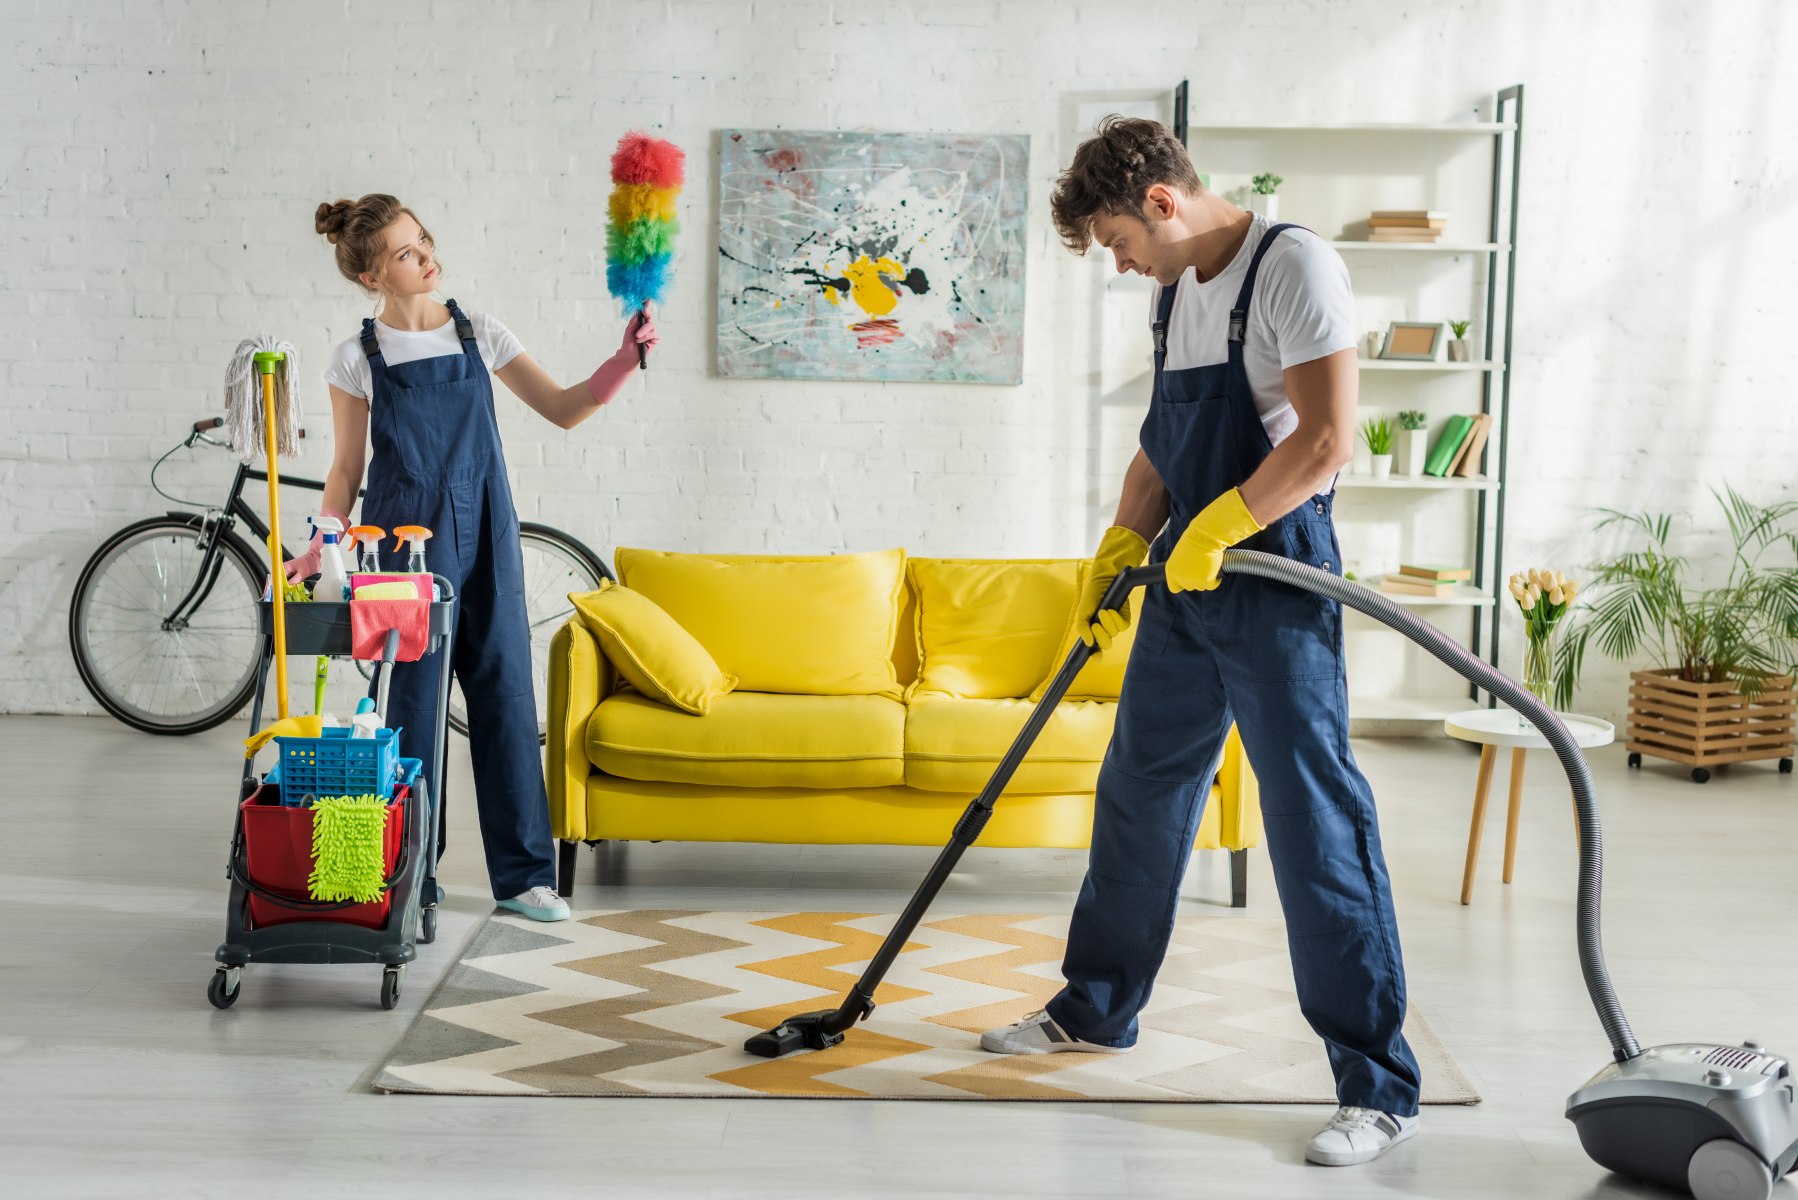 end of tenancy cleaning slough